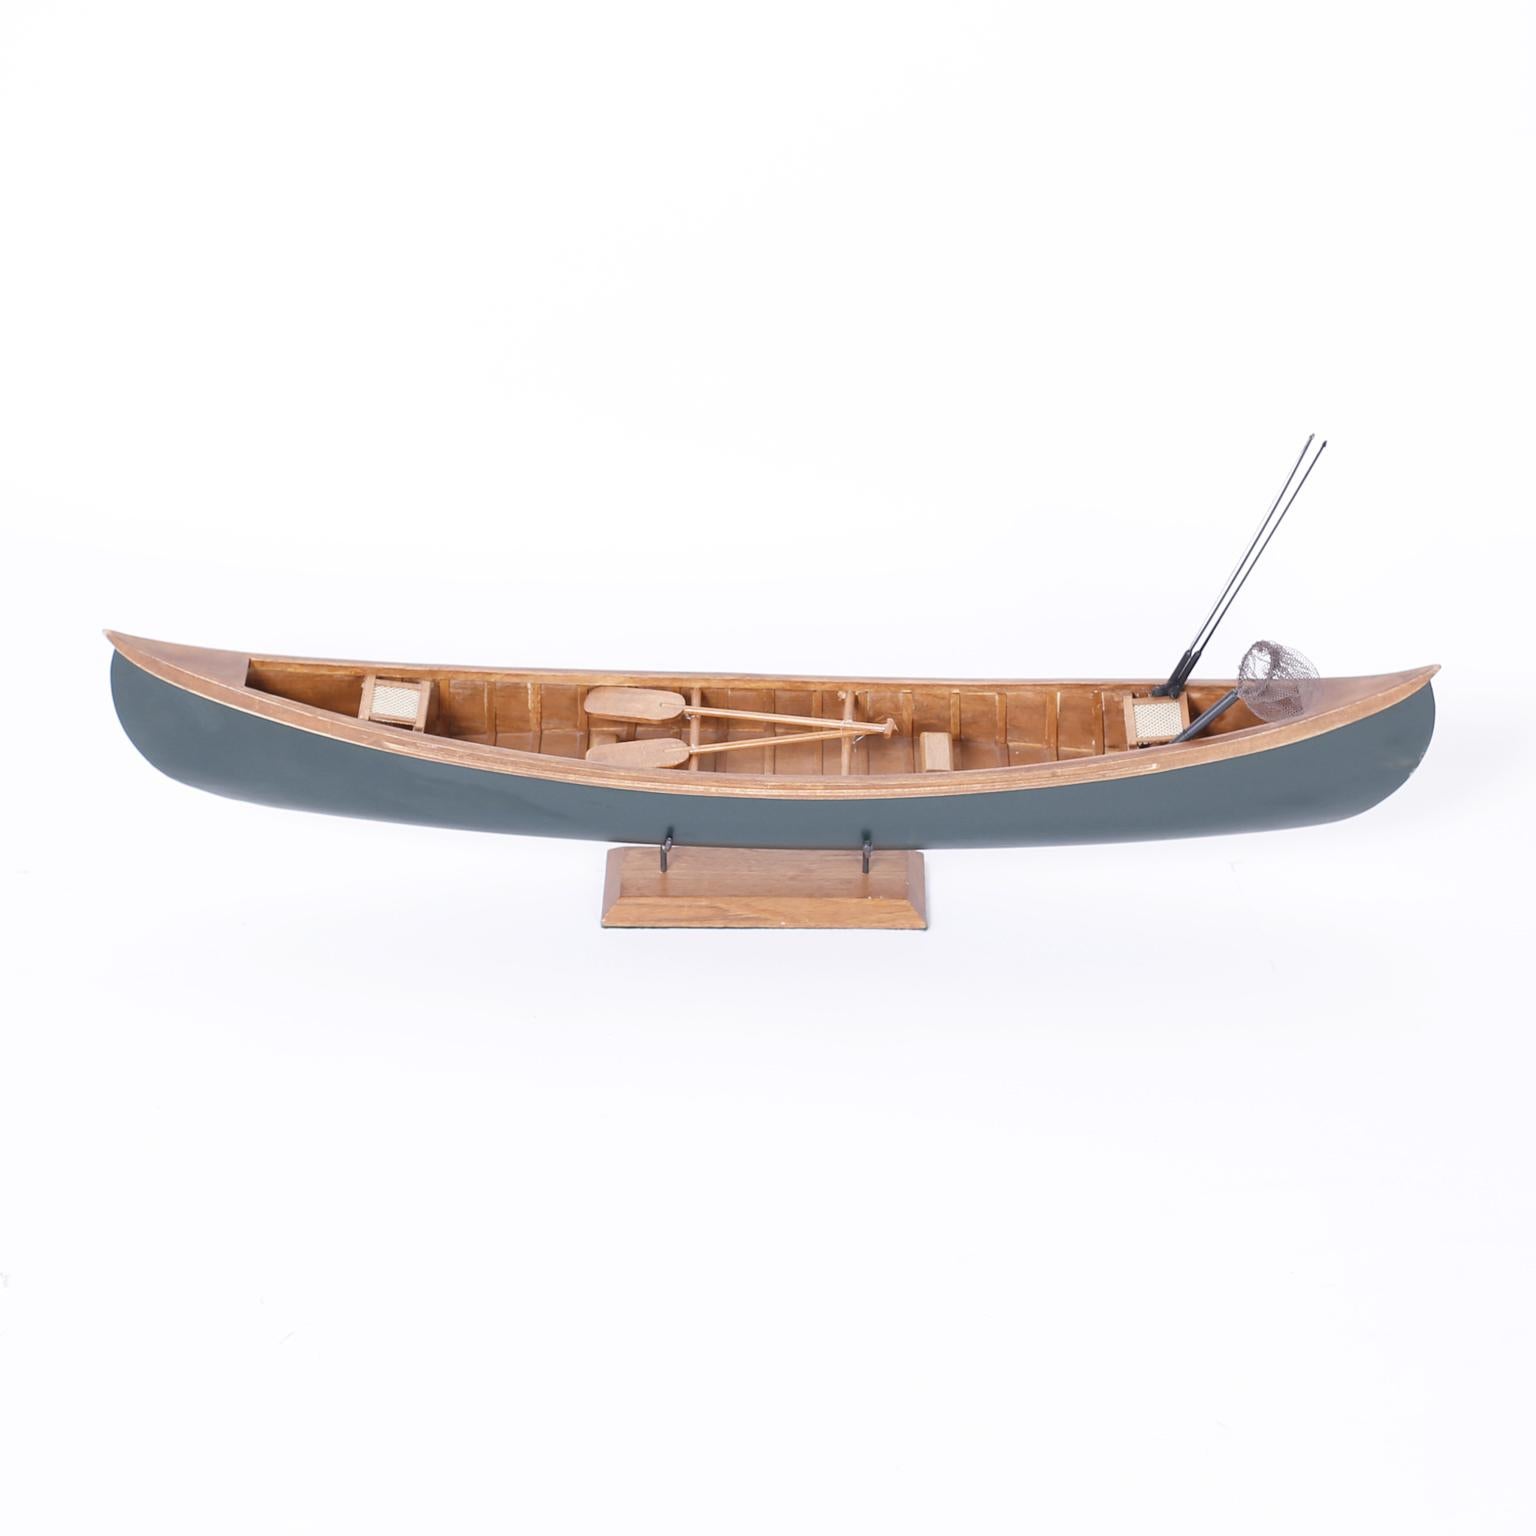 Canoe model realistically crafted in mahogany painted on the outside complete with seats, paddles, fishing poles, net and presented on a mahogany stand.